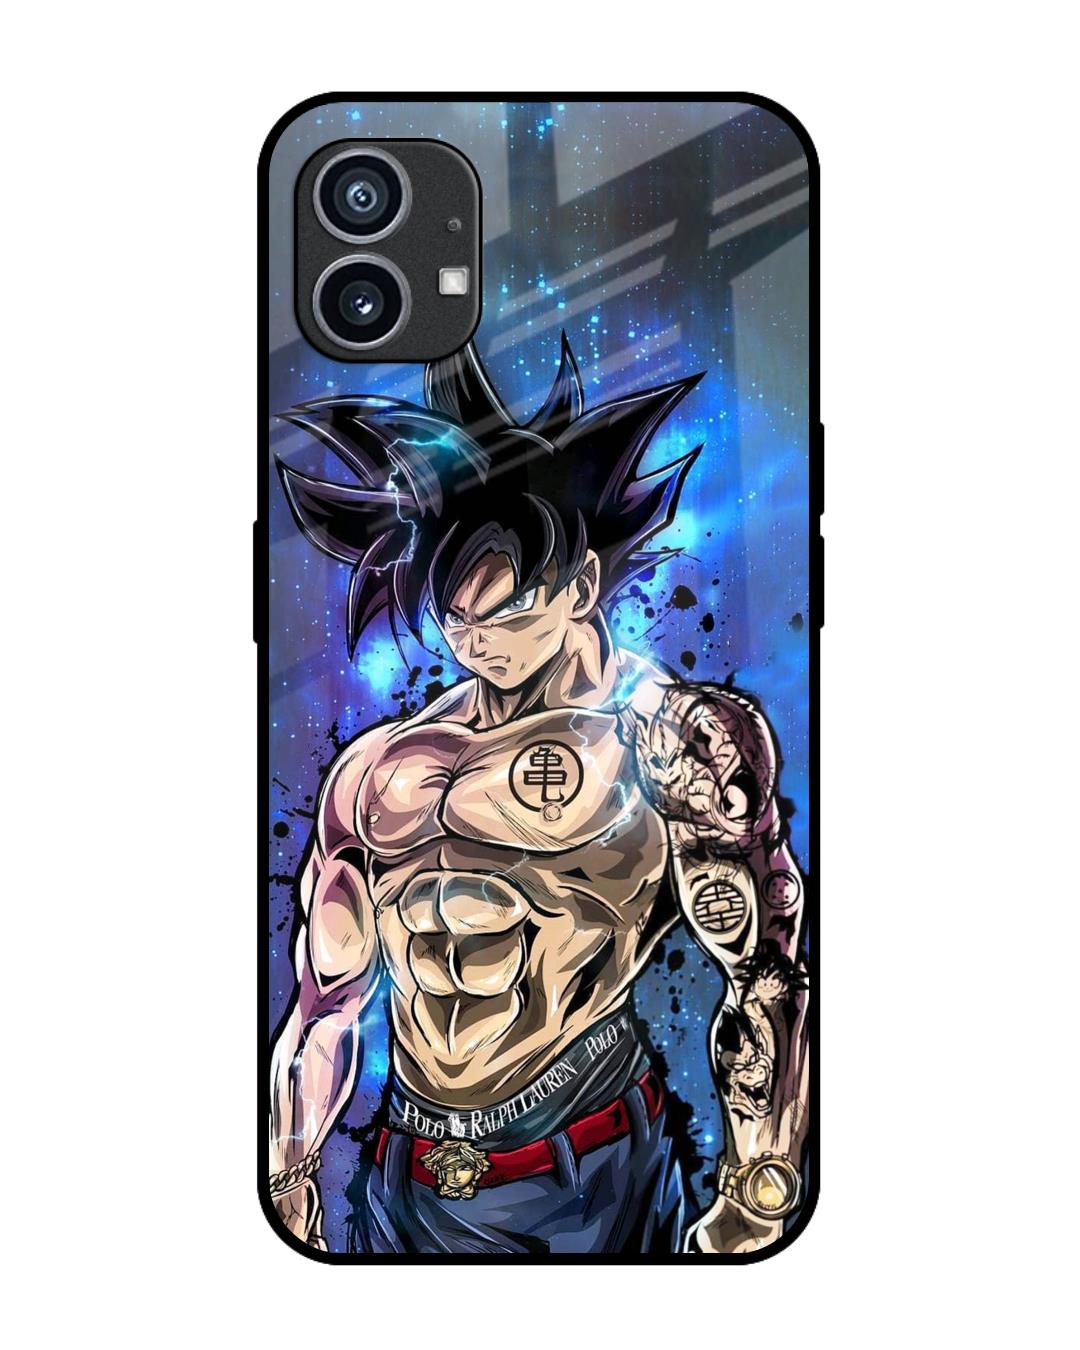 Buy Anime Phone Cases  Covers Online at Bewakoof